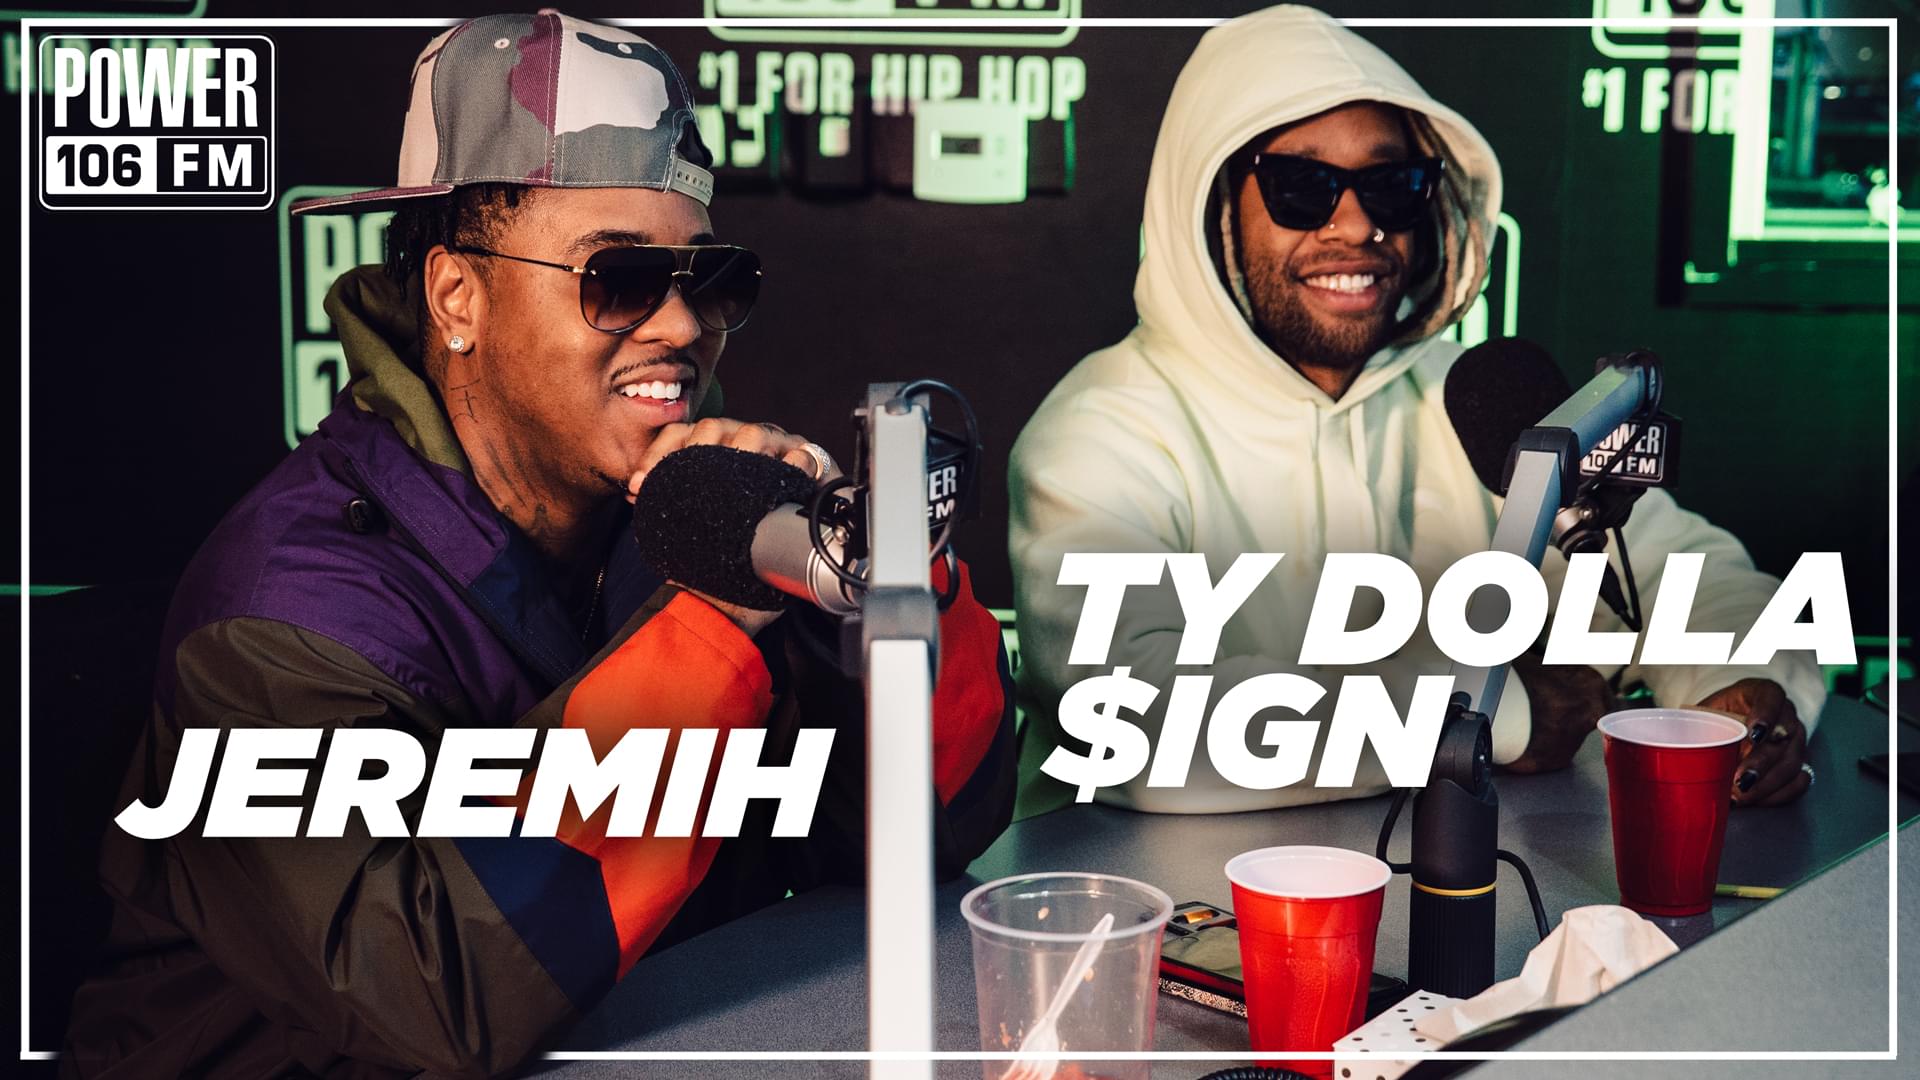 Jeremih & Ty Dolla $ign Talk Lil Wayne “Mihty” Album Feature, Working With Kanye West, + MORE! [WATCH]